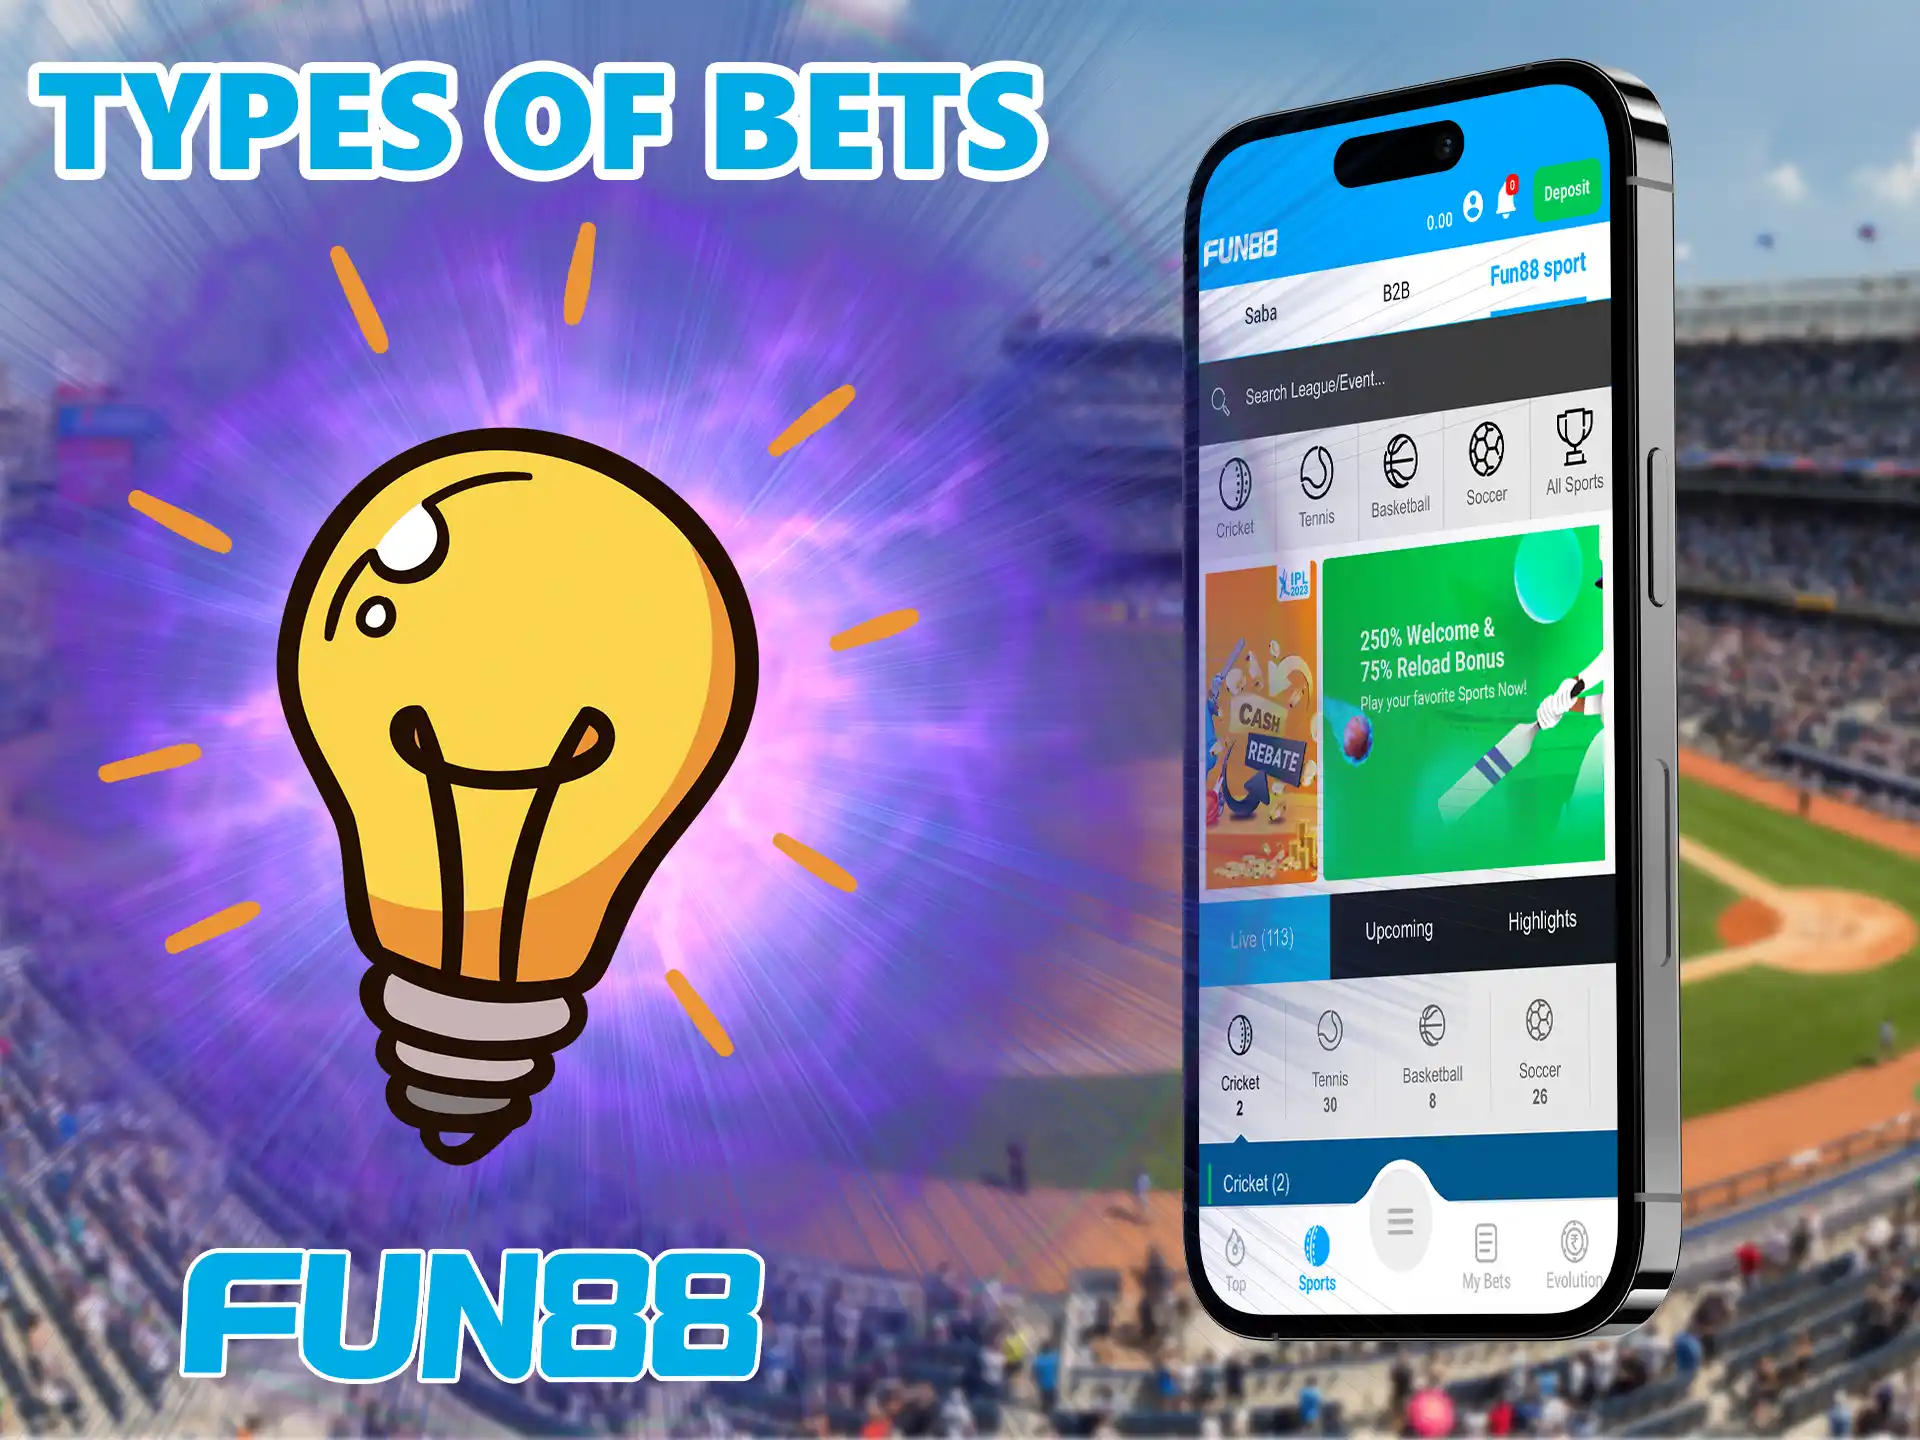 Try single bets and accumulators in the Fun88 app our article will help you with your choices.